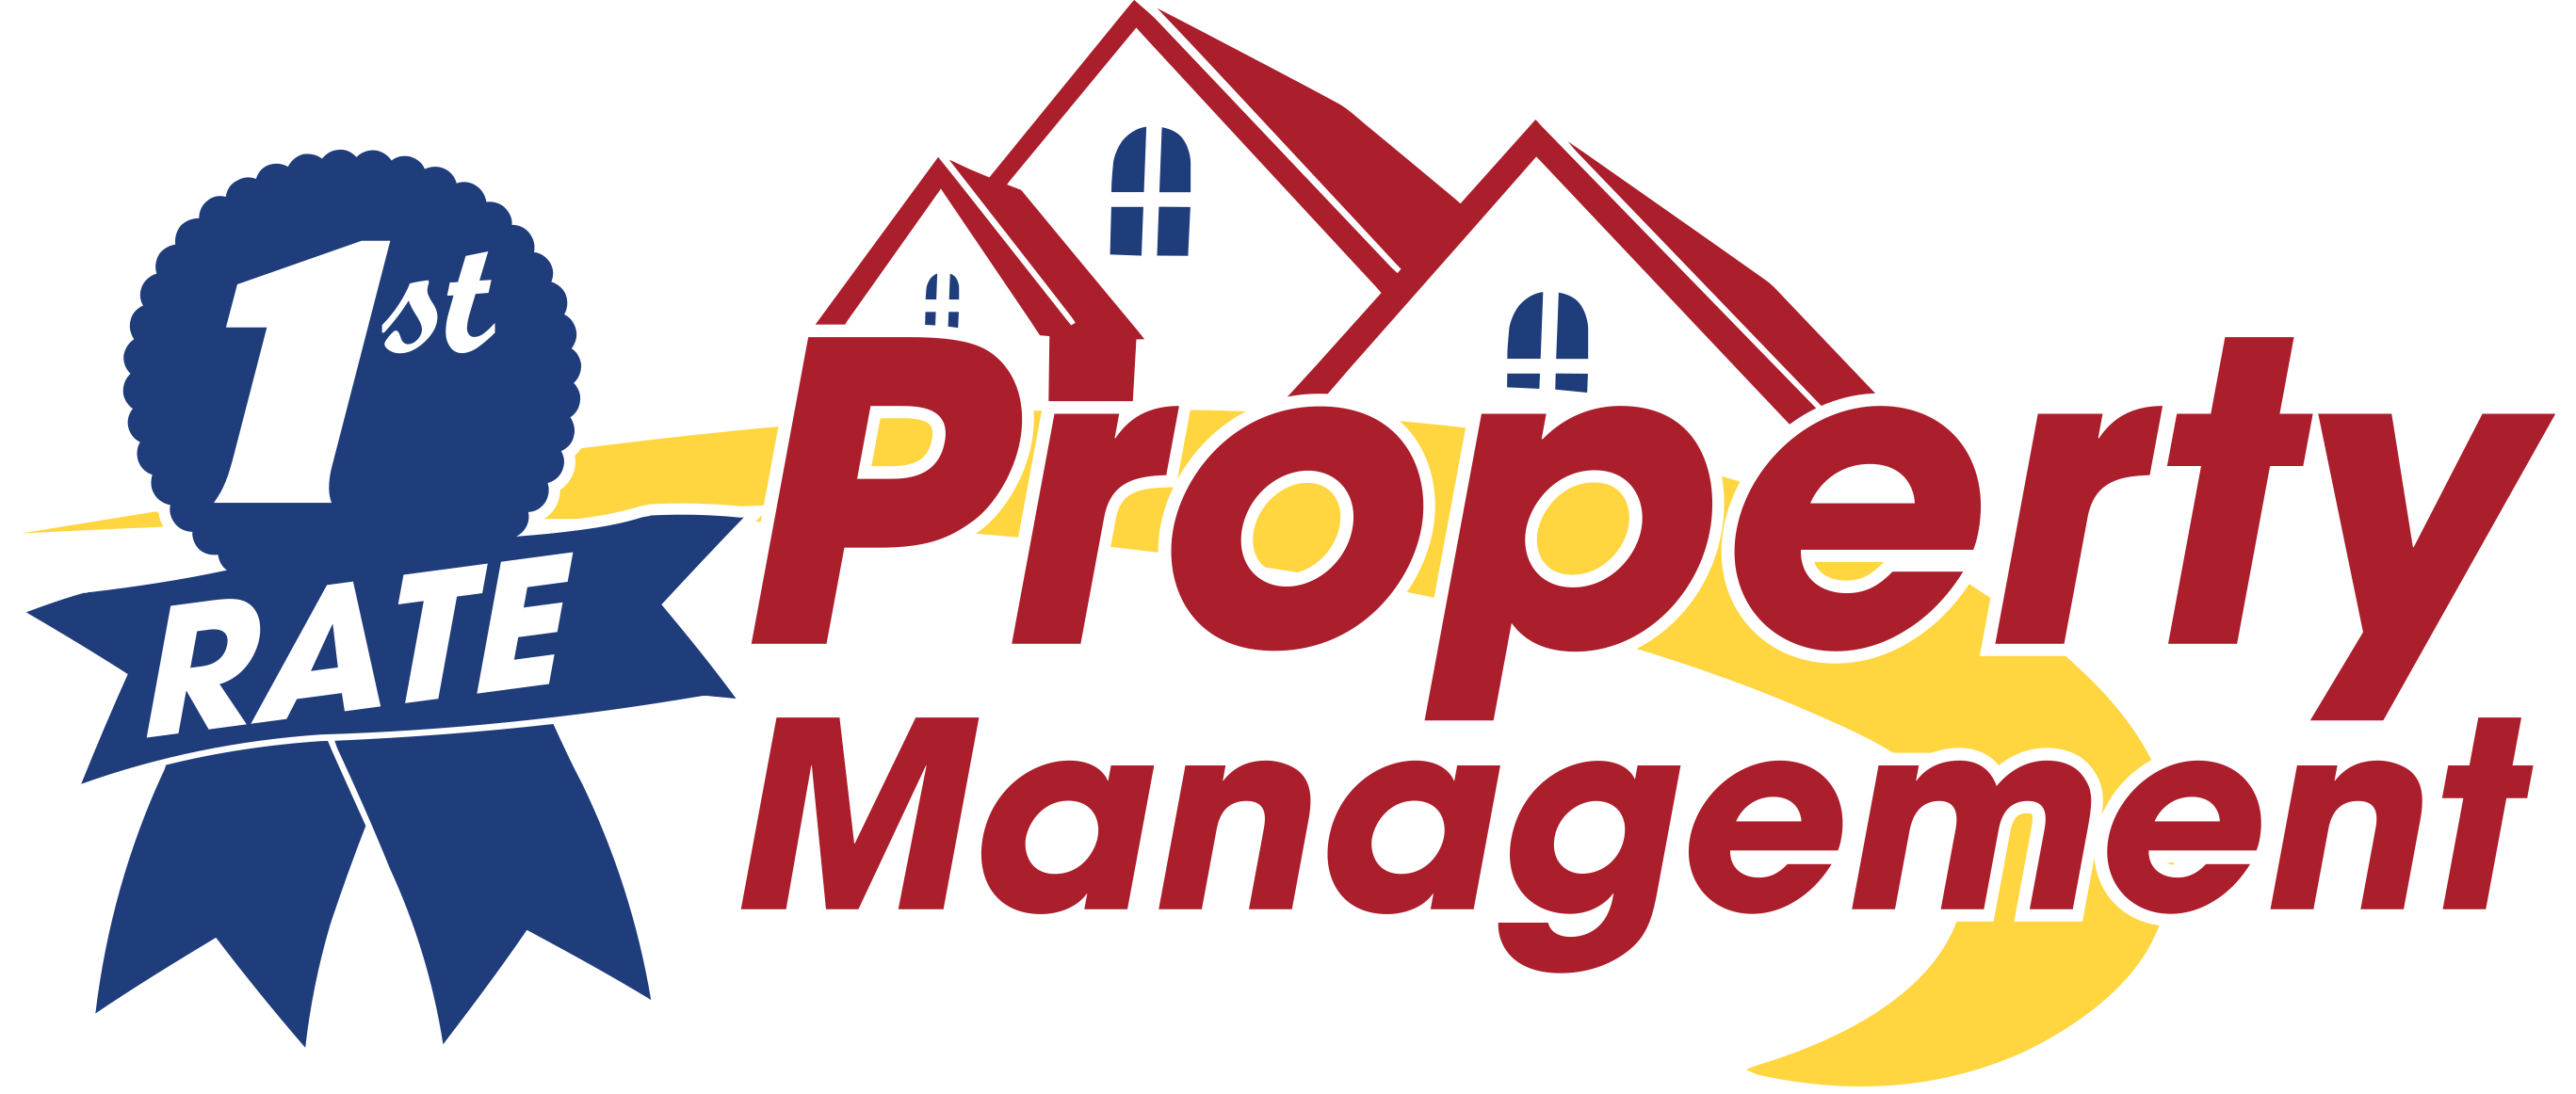 1st Rate Property Management